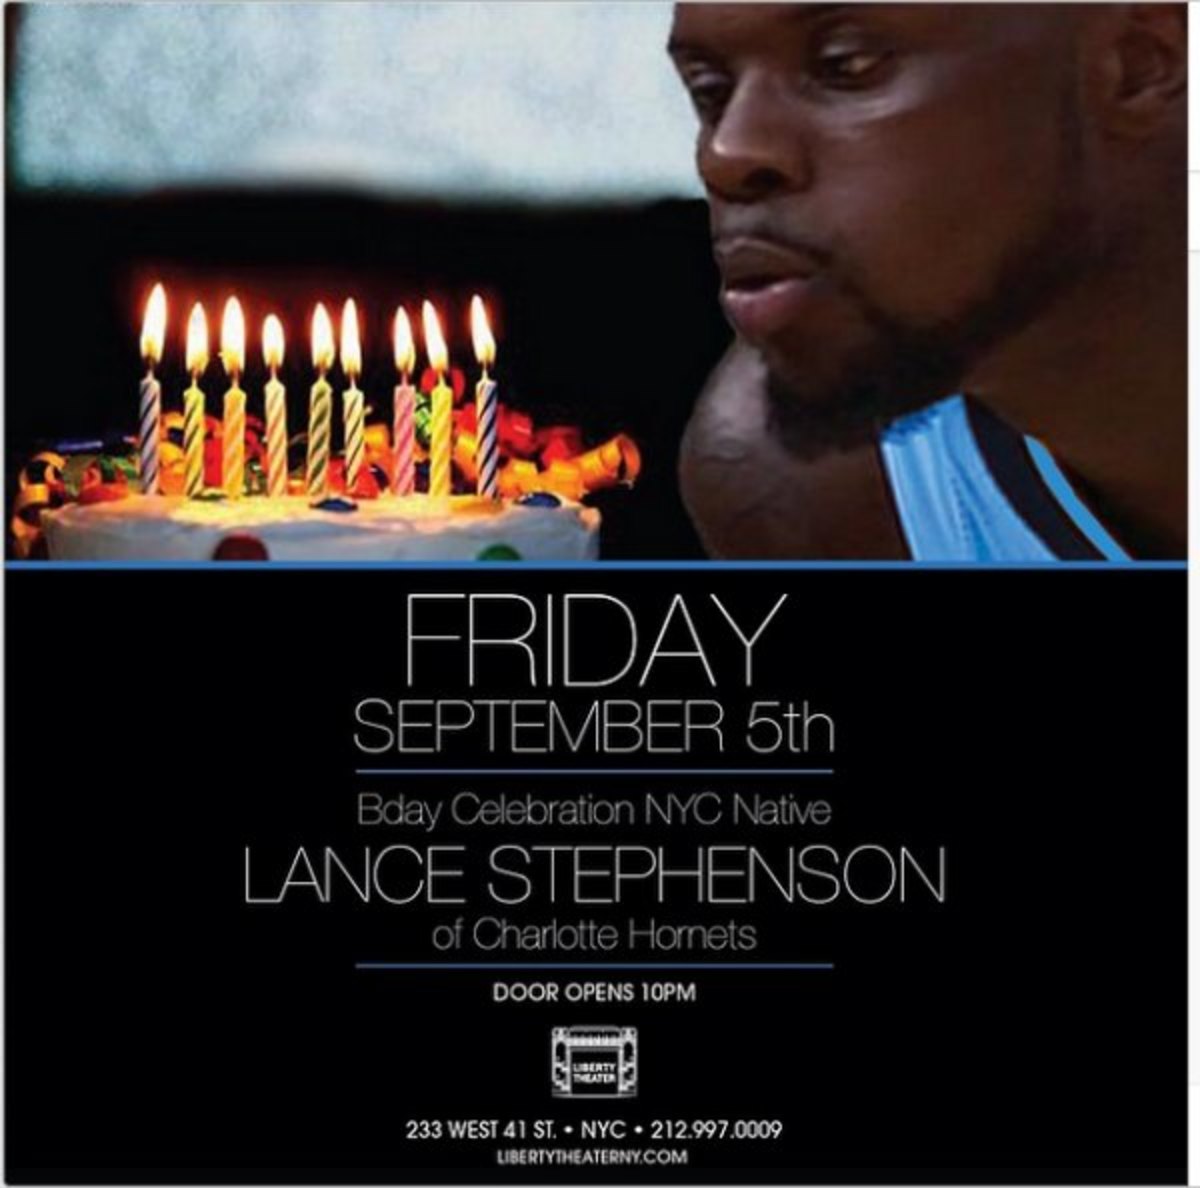 Lance Stephenson is using the ear blowing meme for his birthday invite